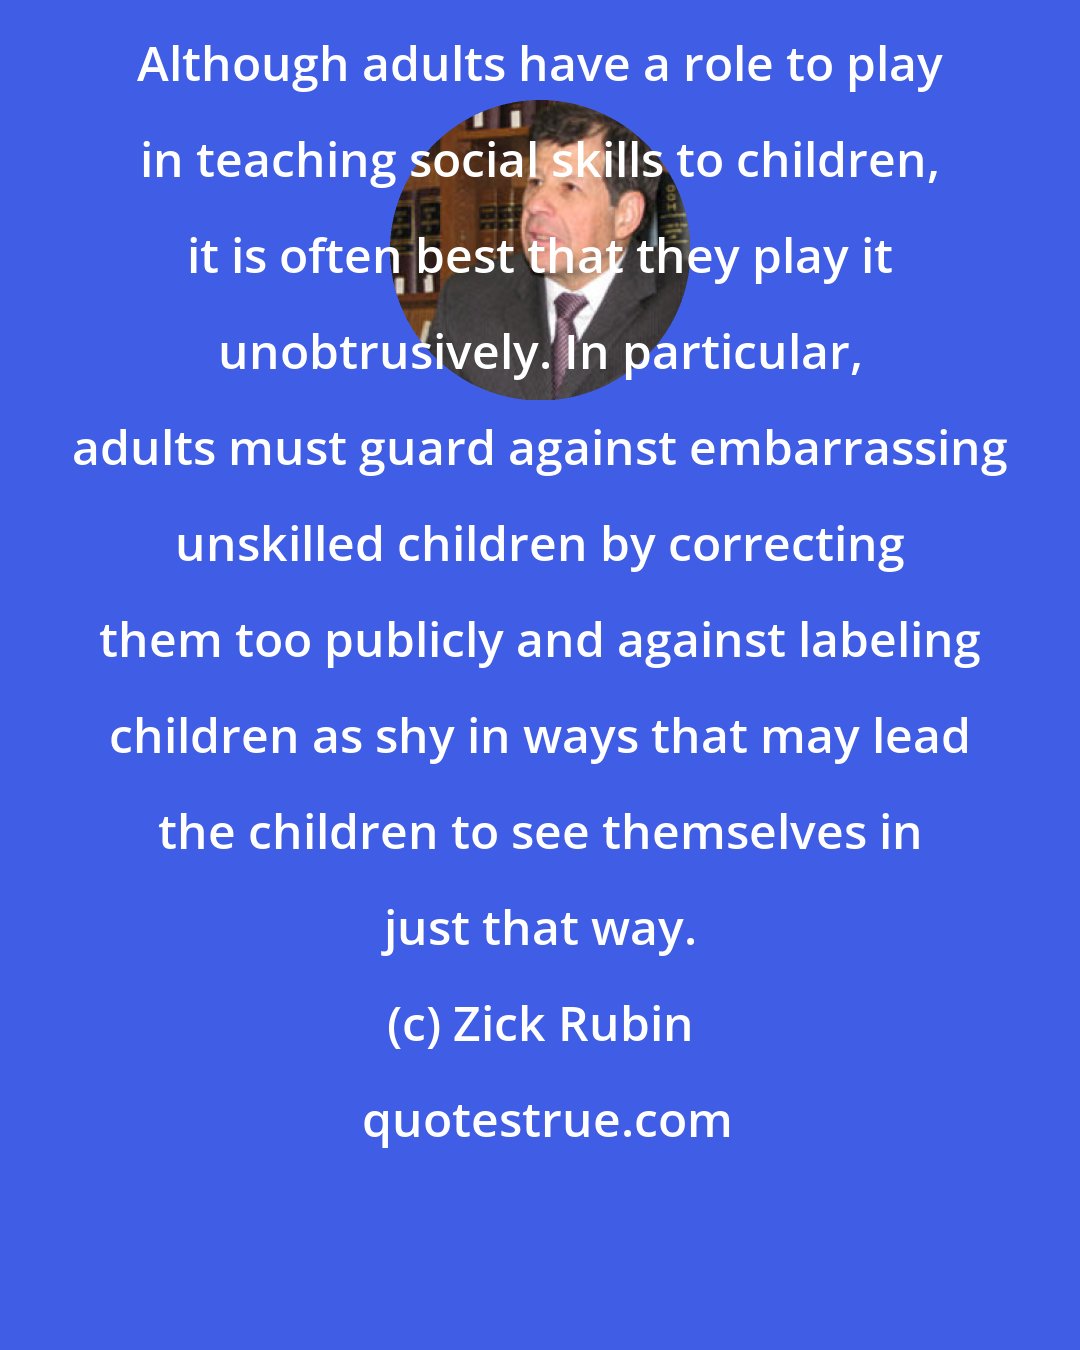 Zick Rubin: Although adults have a role to play in teaching social skills to children, it is often best that they play it unobtrusively. In particular, adults must guard against embarrassing unskilled children by correcting them too publicly and against labeling children as shy in ways that may lead the children to see themselves in just that way.